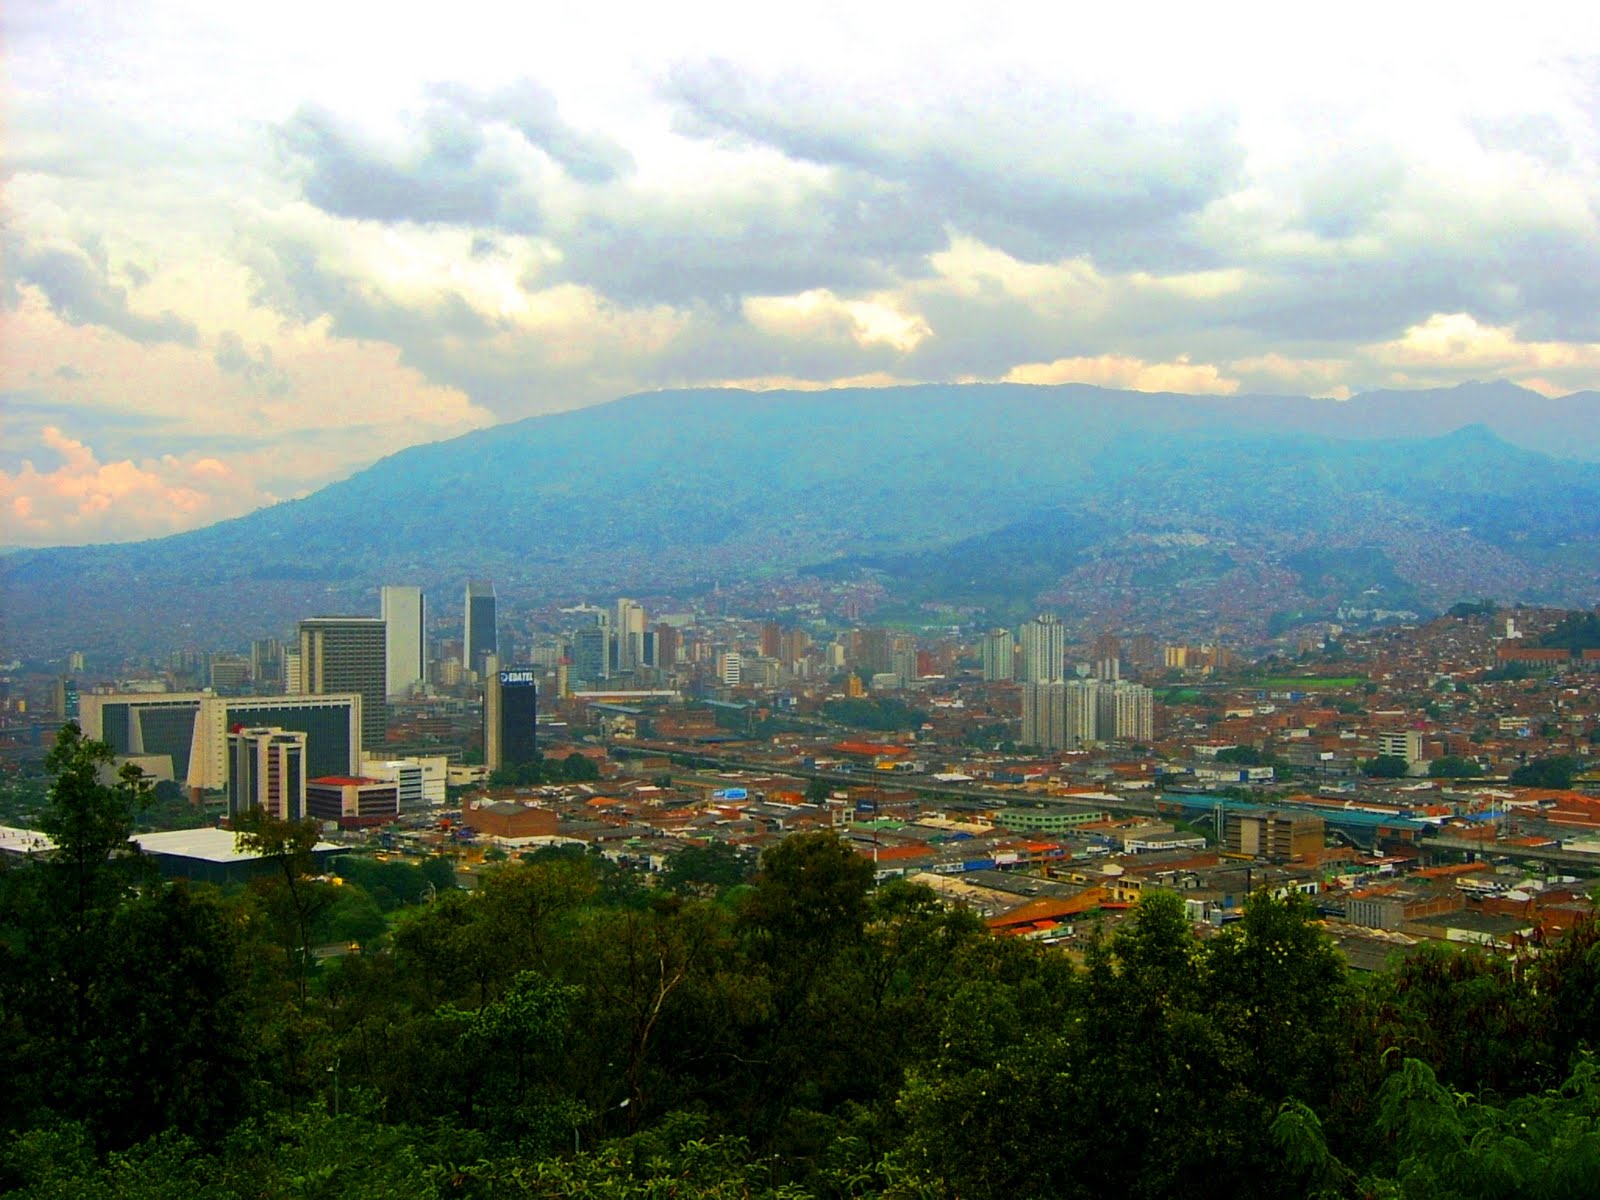 Image Medellin Colombia Pc Android iPhone And iPad Wallpaper